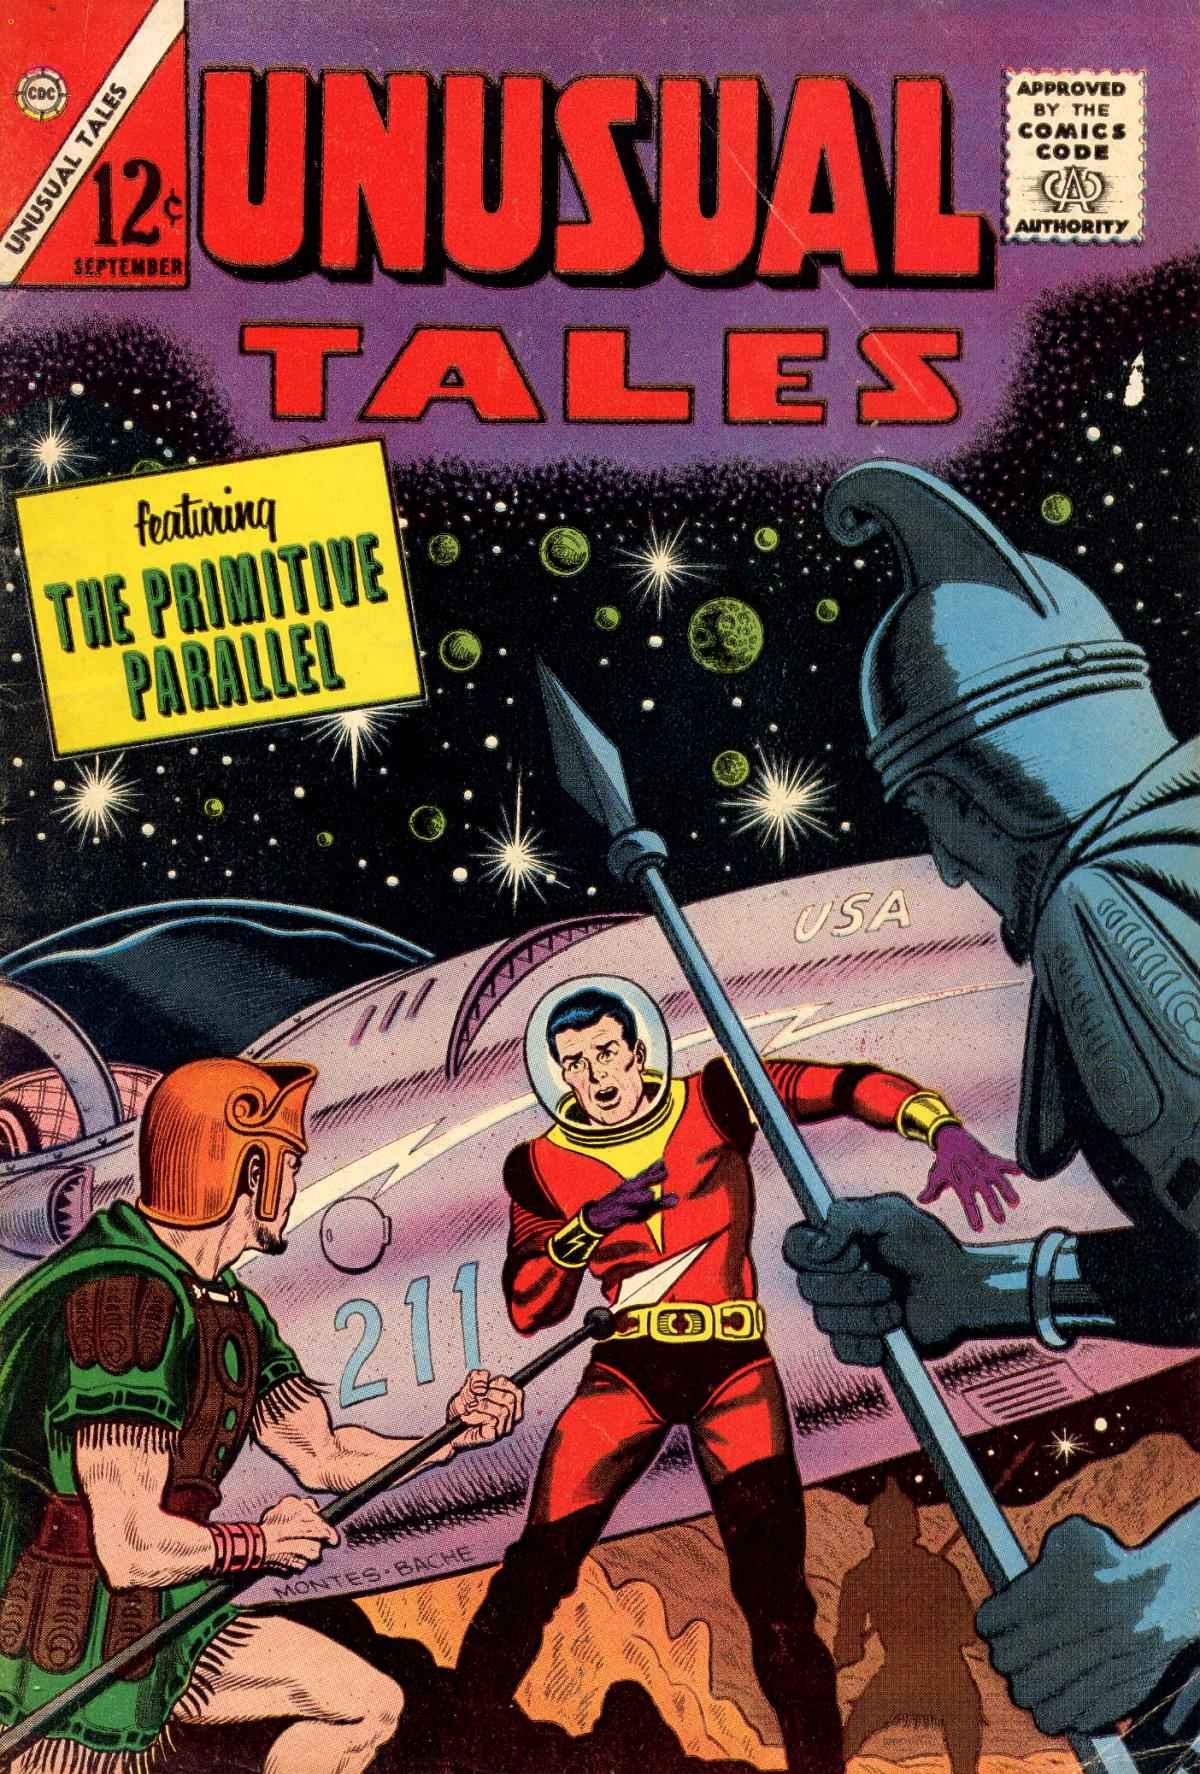 Read online Unusual Tales comic -  Issue #41 - 1